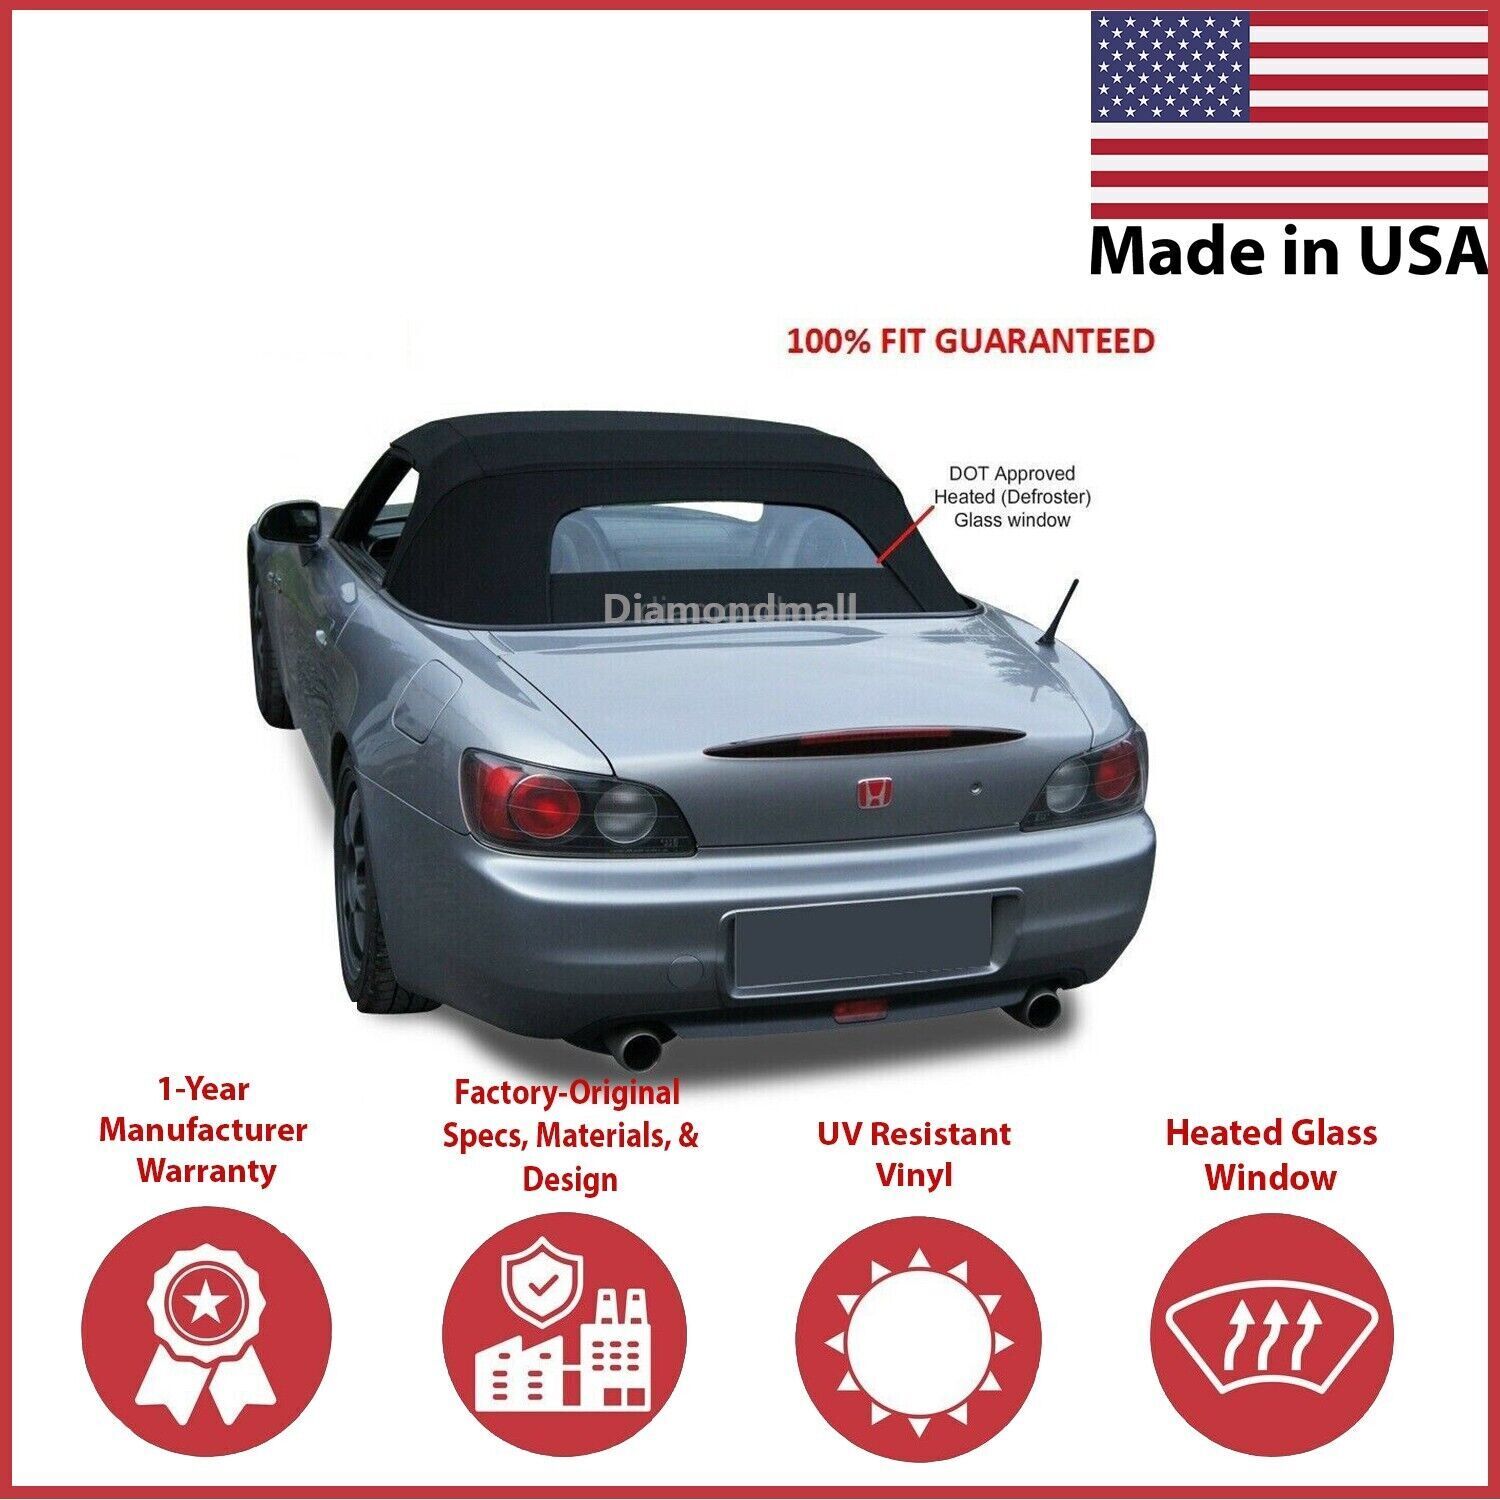 2002-09 Honda S2000 Convertible Soft Top w/DOT Approved Heated Glass, Black